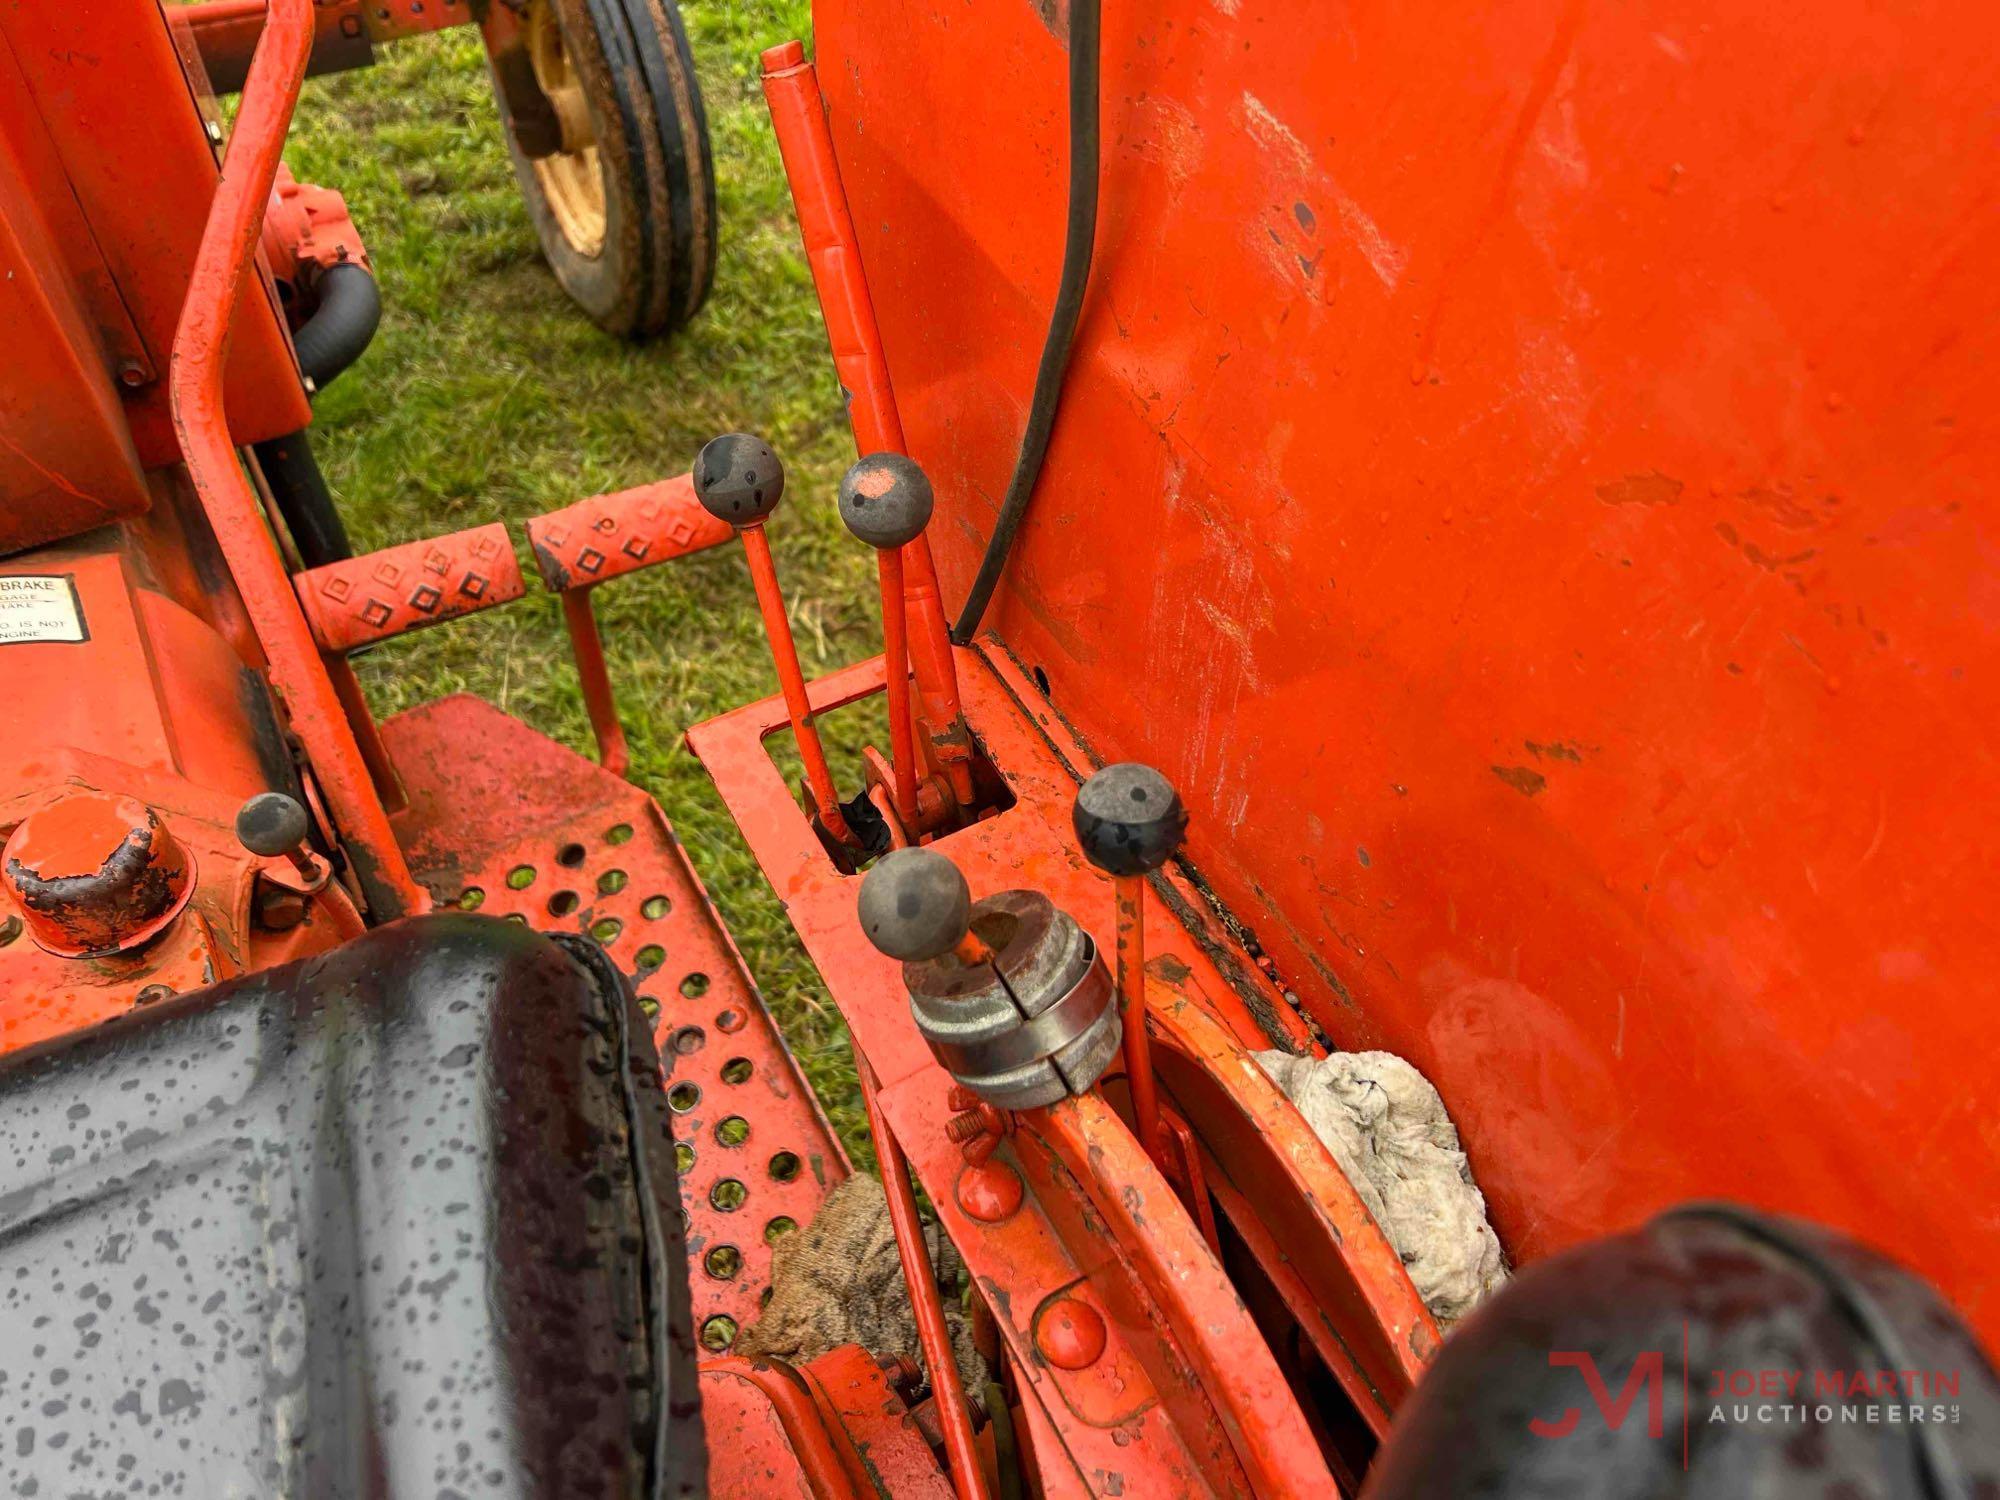 ALLIS-CHALMERS ONE-SEVENTY AG TRACTOR